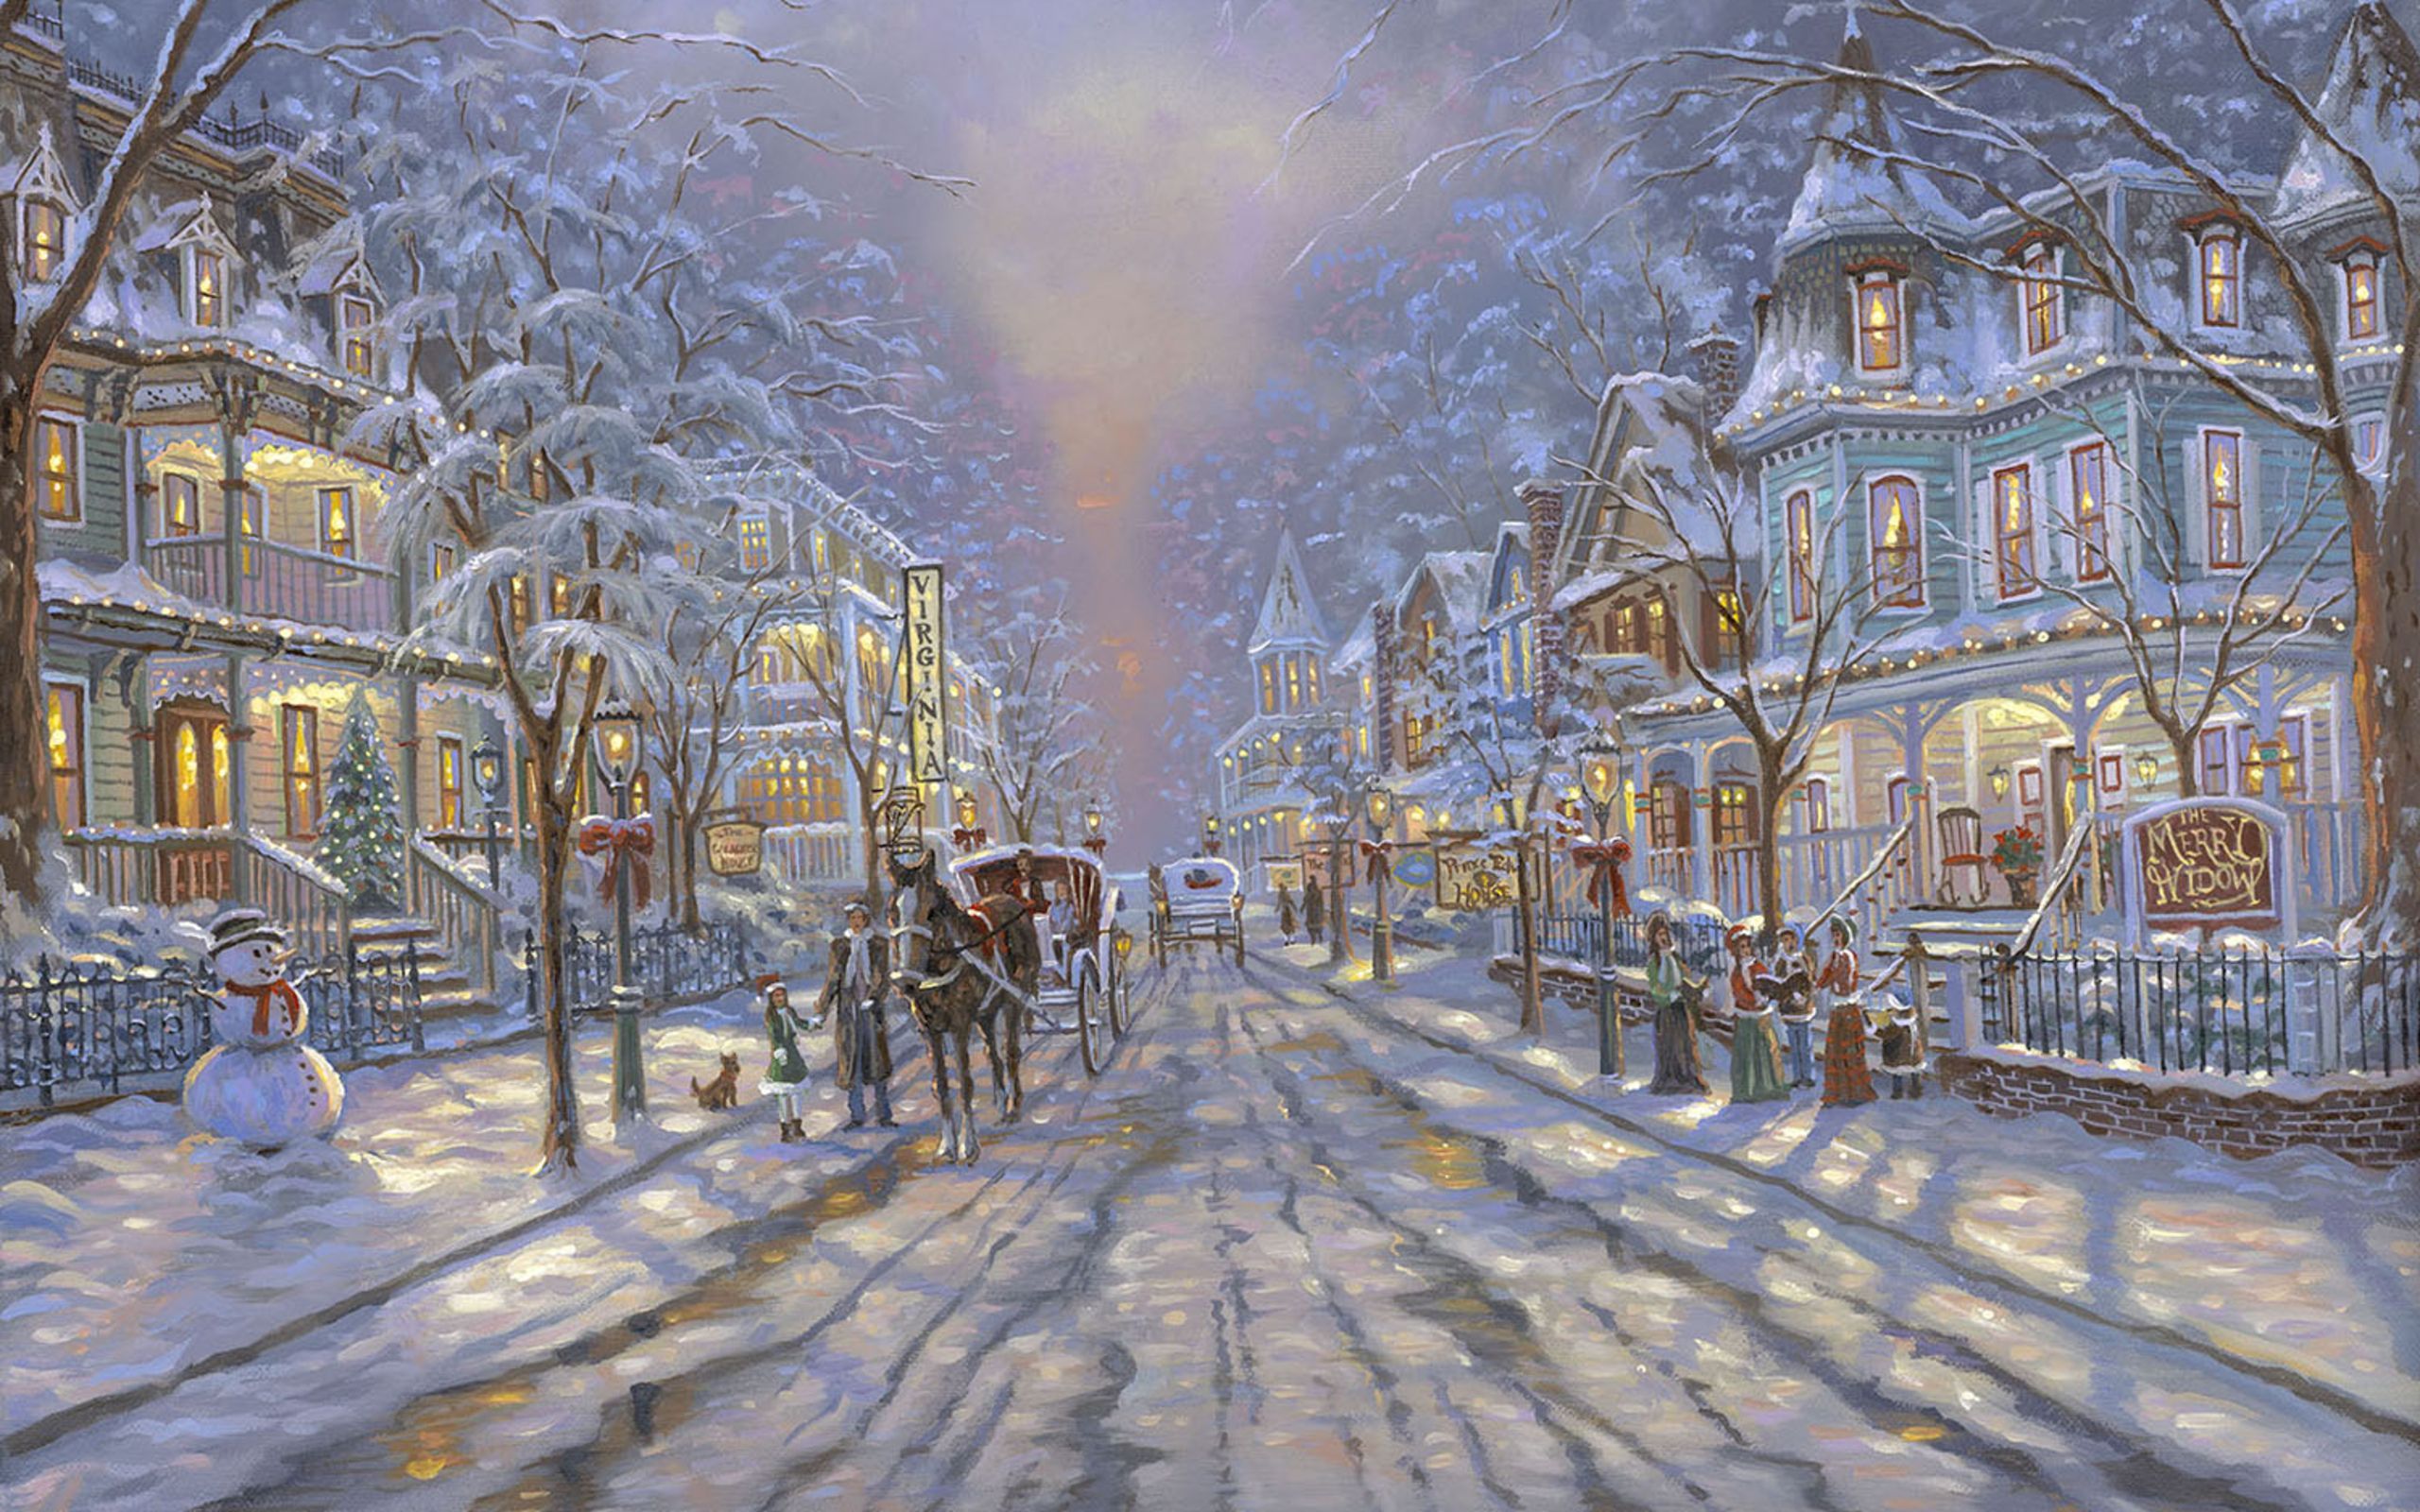 Christmas Paintings Wallpaper. wallpaper painting, Christmas, Street, Cottages free desktop wallpaper. Winter painting, Winter wallpaper desktop, Winter picture